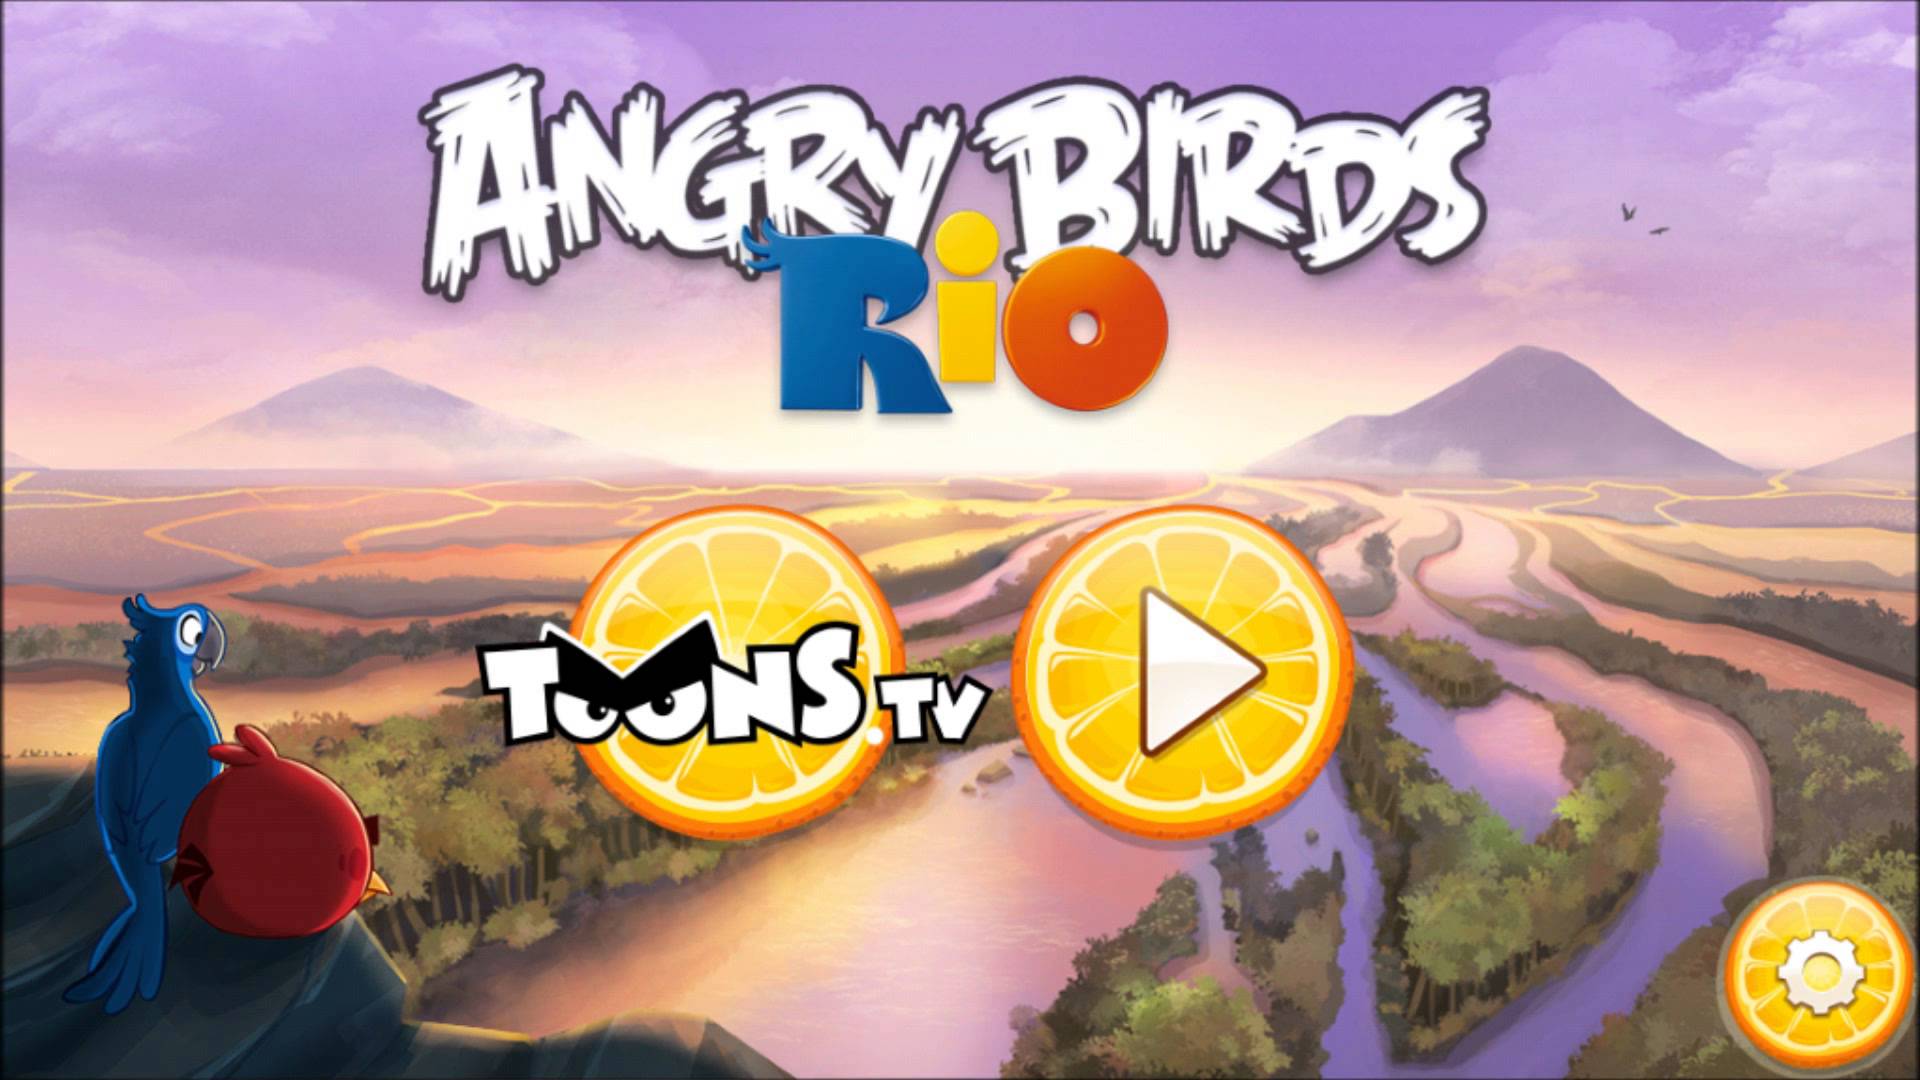 Nice wallpapers Angry Birds Rio 1920x1080px